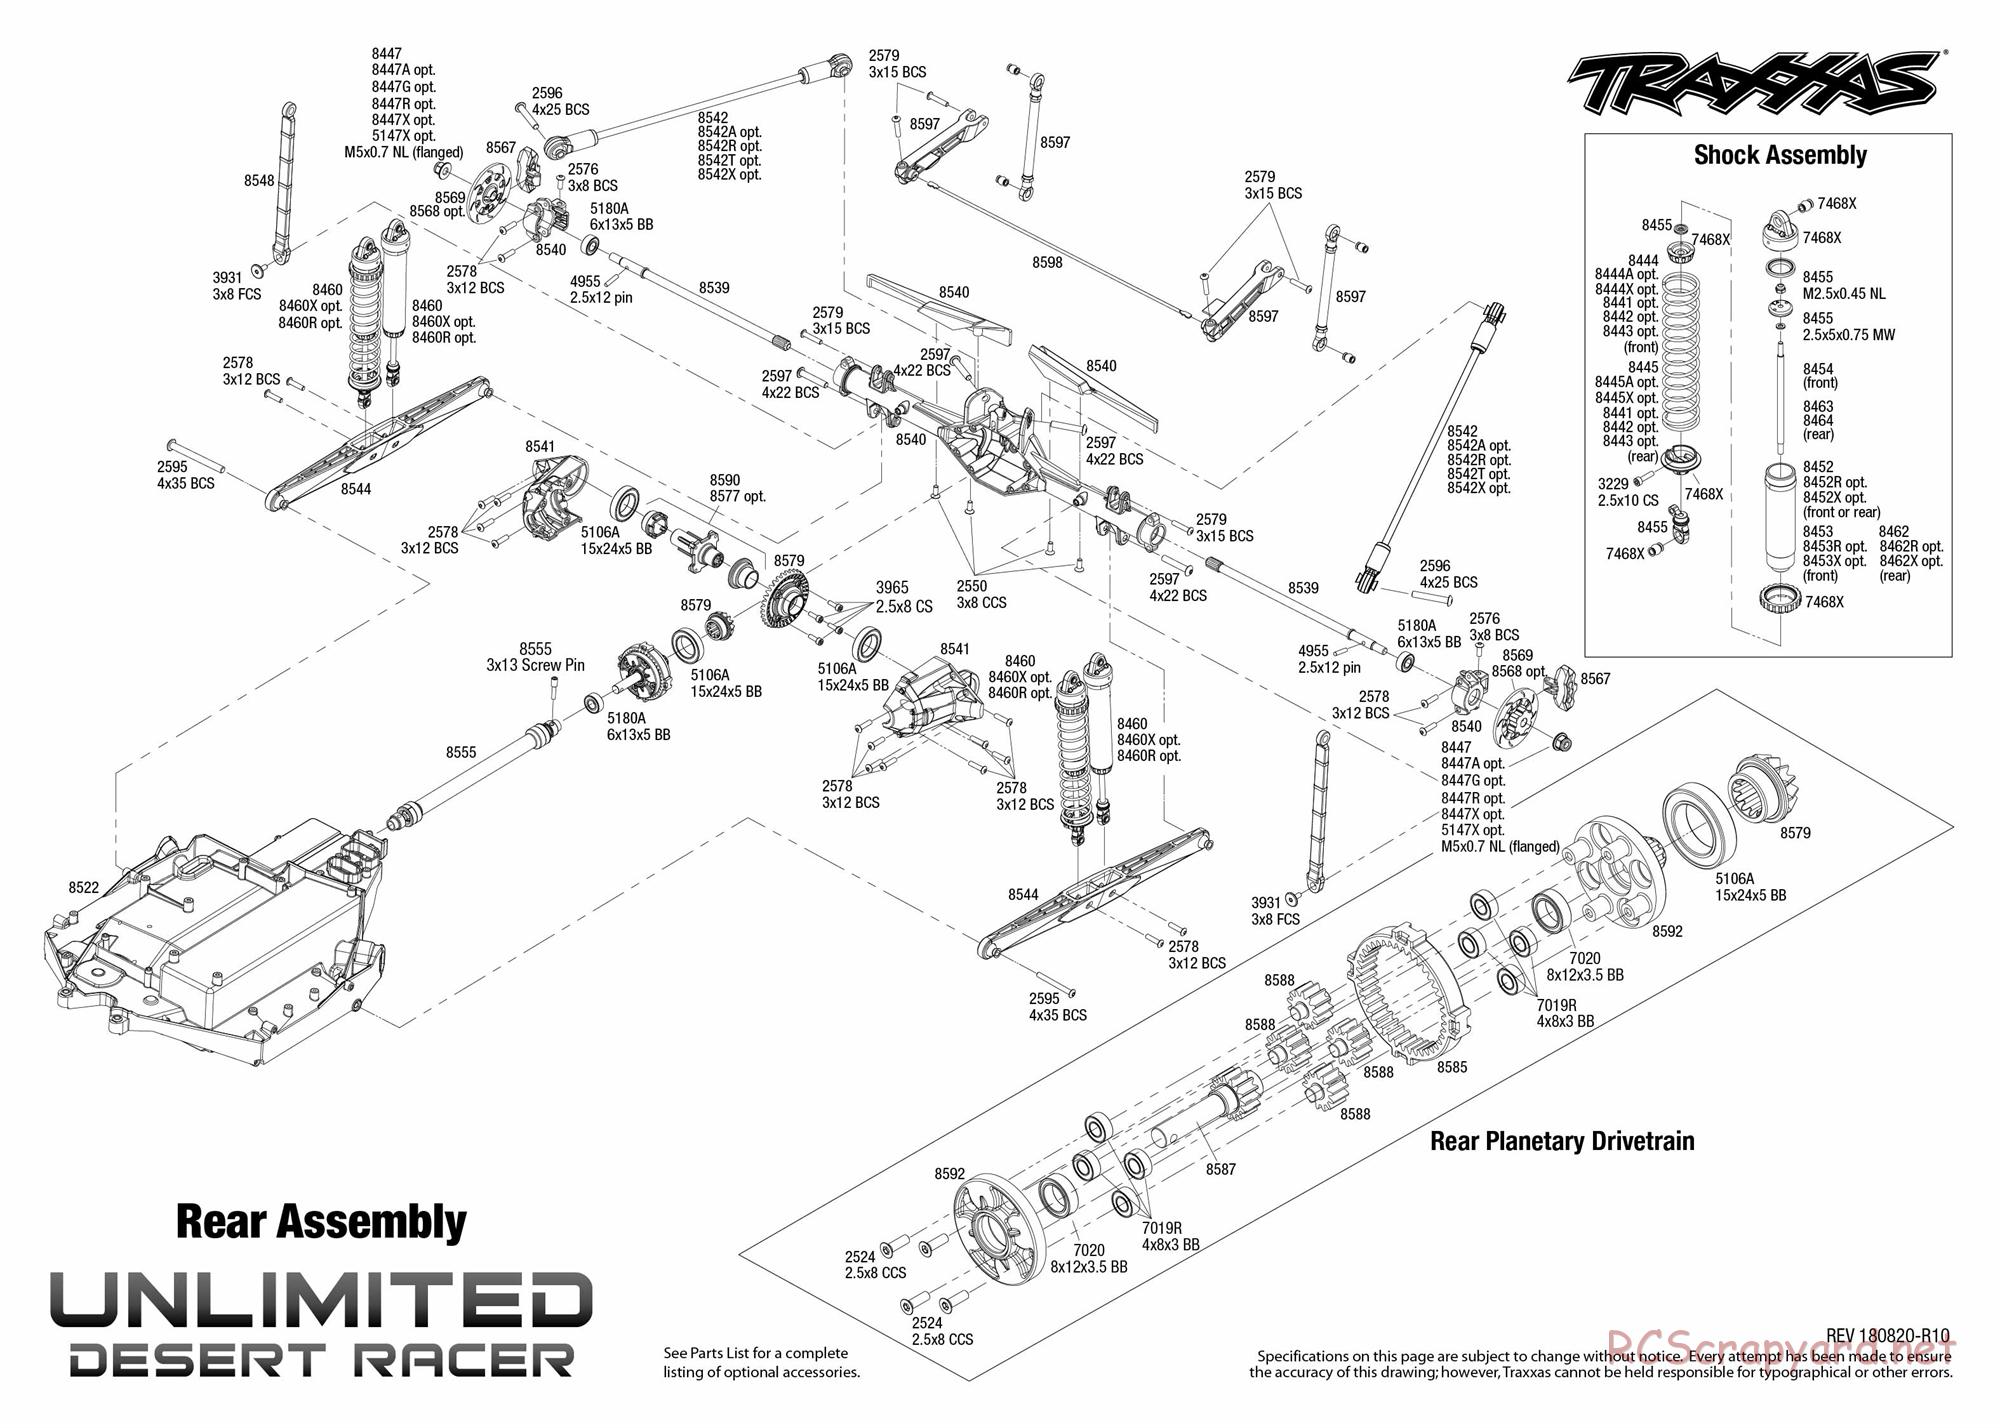 Traxxas - Unlimited Desert Racer VXL TSM (2018) - Exploded Views - Page 4